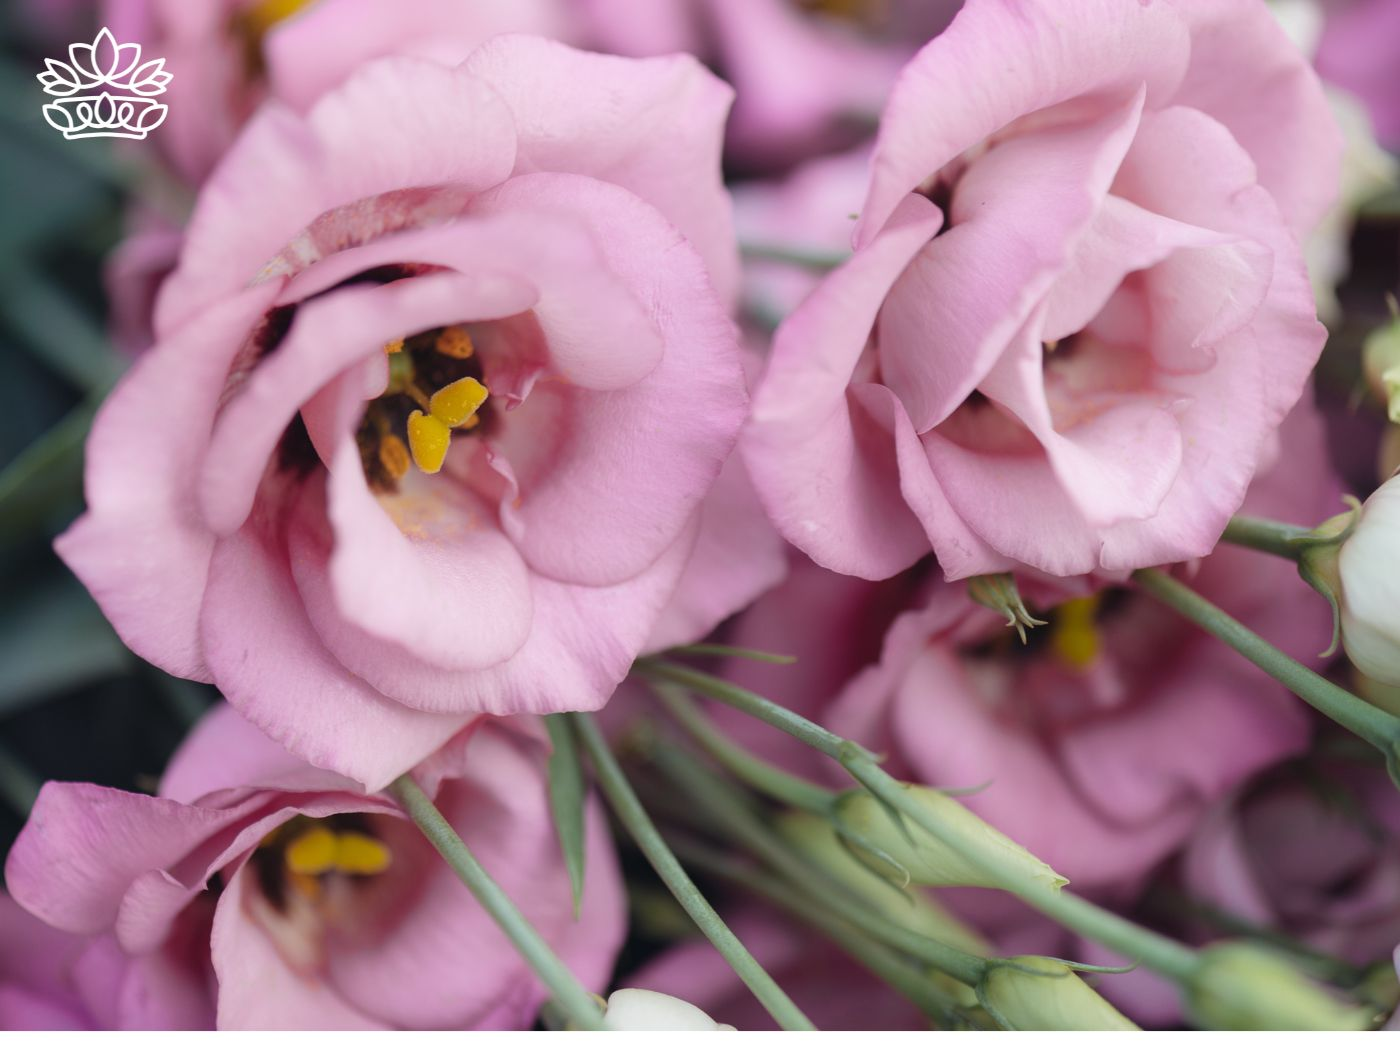 Close-up of pink lisianthus flowers with a rose-like appearance, highlighted by their soft, unfolding petals and bright yellow stamens. These flowers thrive in high humidity environments, showcasing their delicate charm. Part of the Lisianthus Collection at Fabulous Flowers and Gifts.